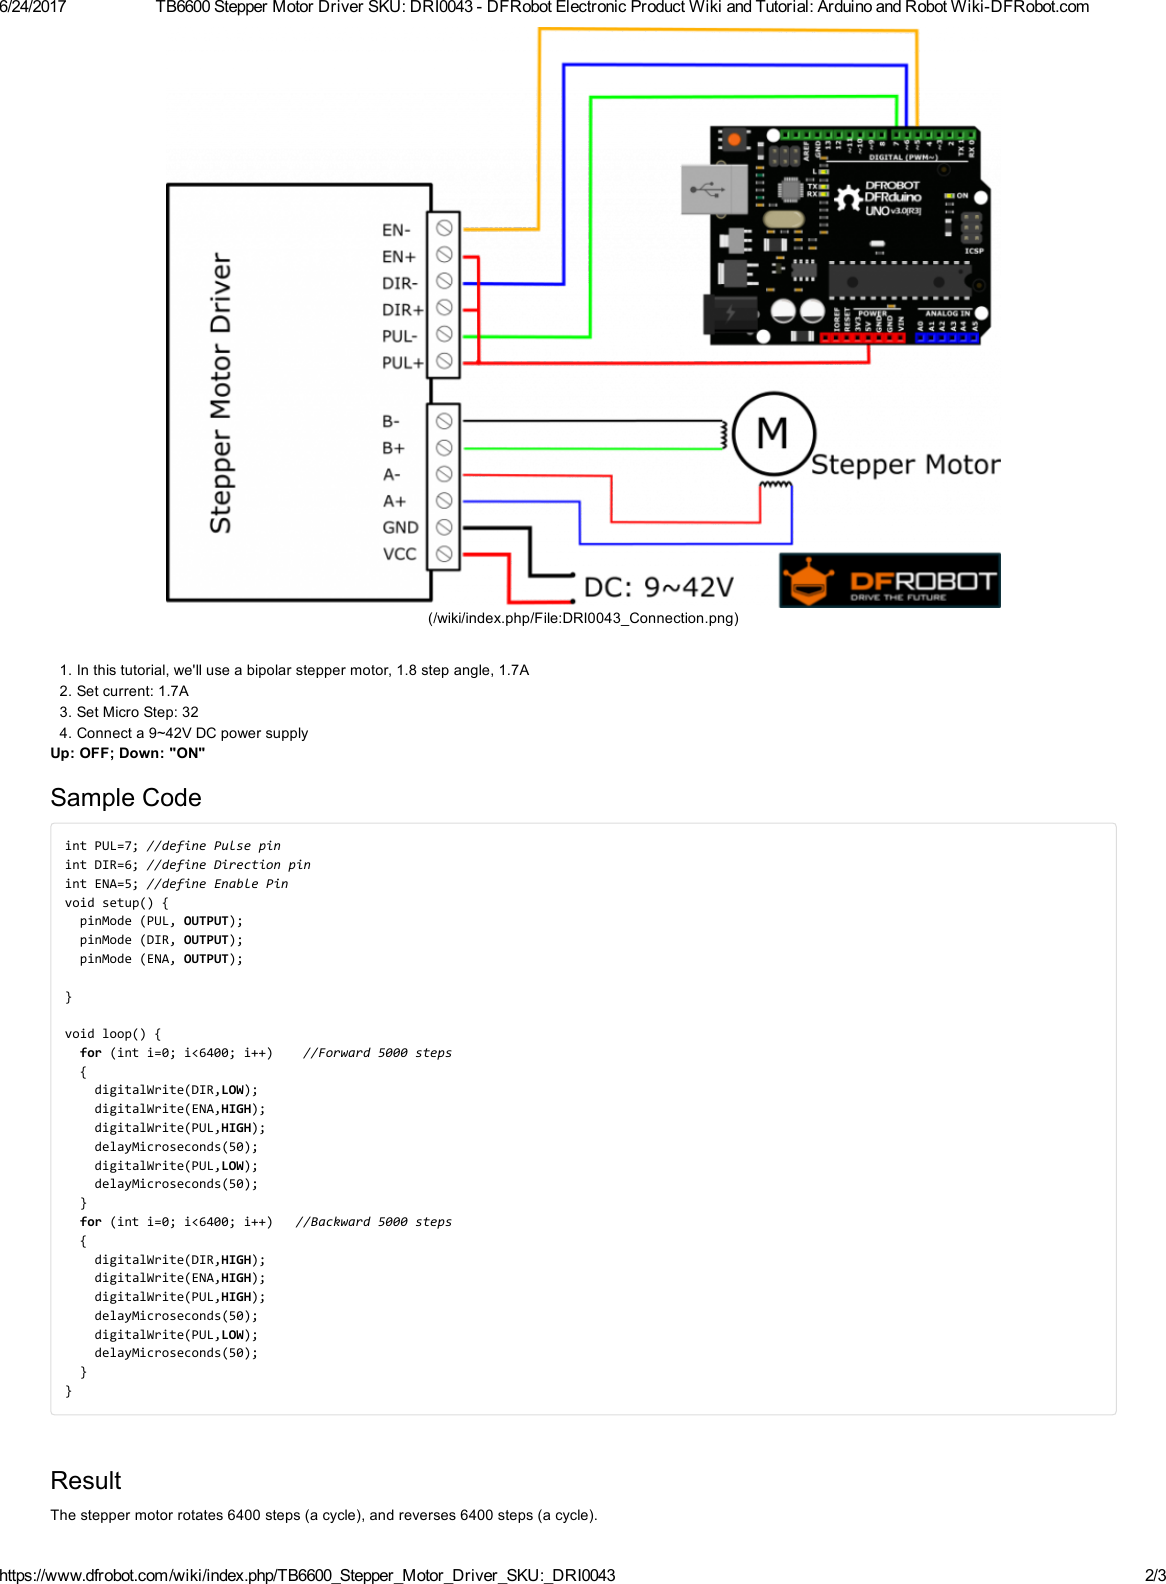 Page 2 of 3 - TB6600 Stepper Motor Driver SKU DRI0043 - DFRobot Electronic Product Wiki And Tutorial Arduino Robot Wiki-DFRobot